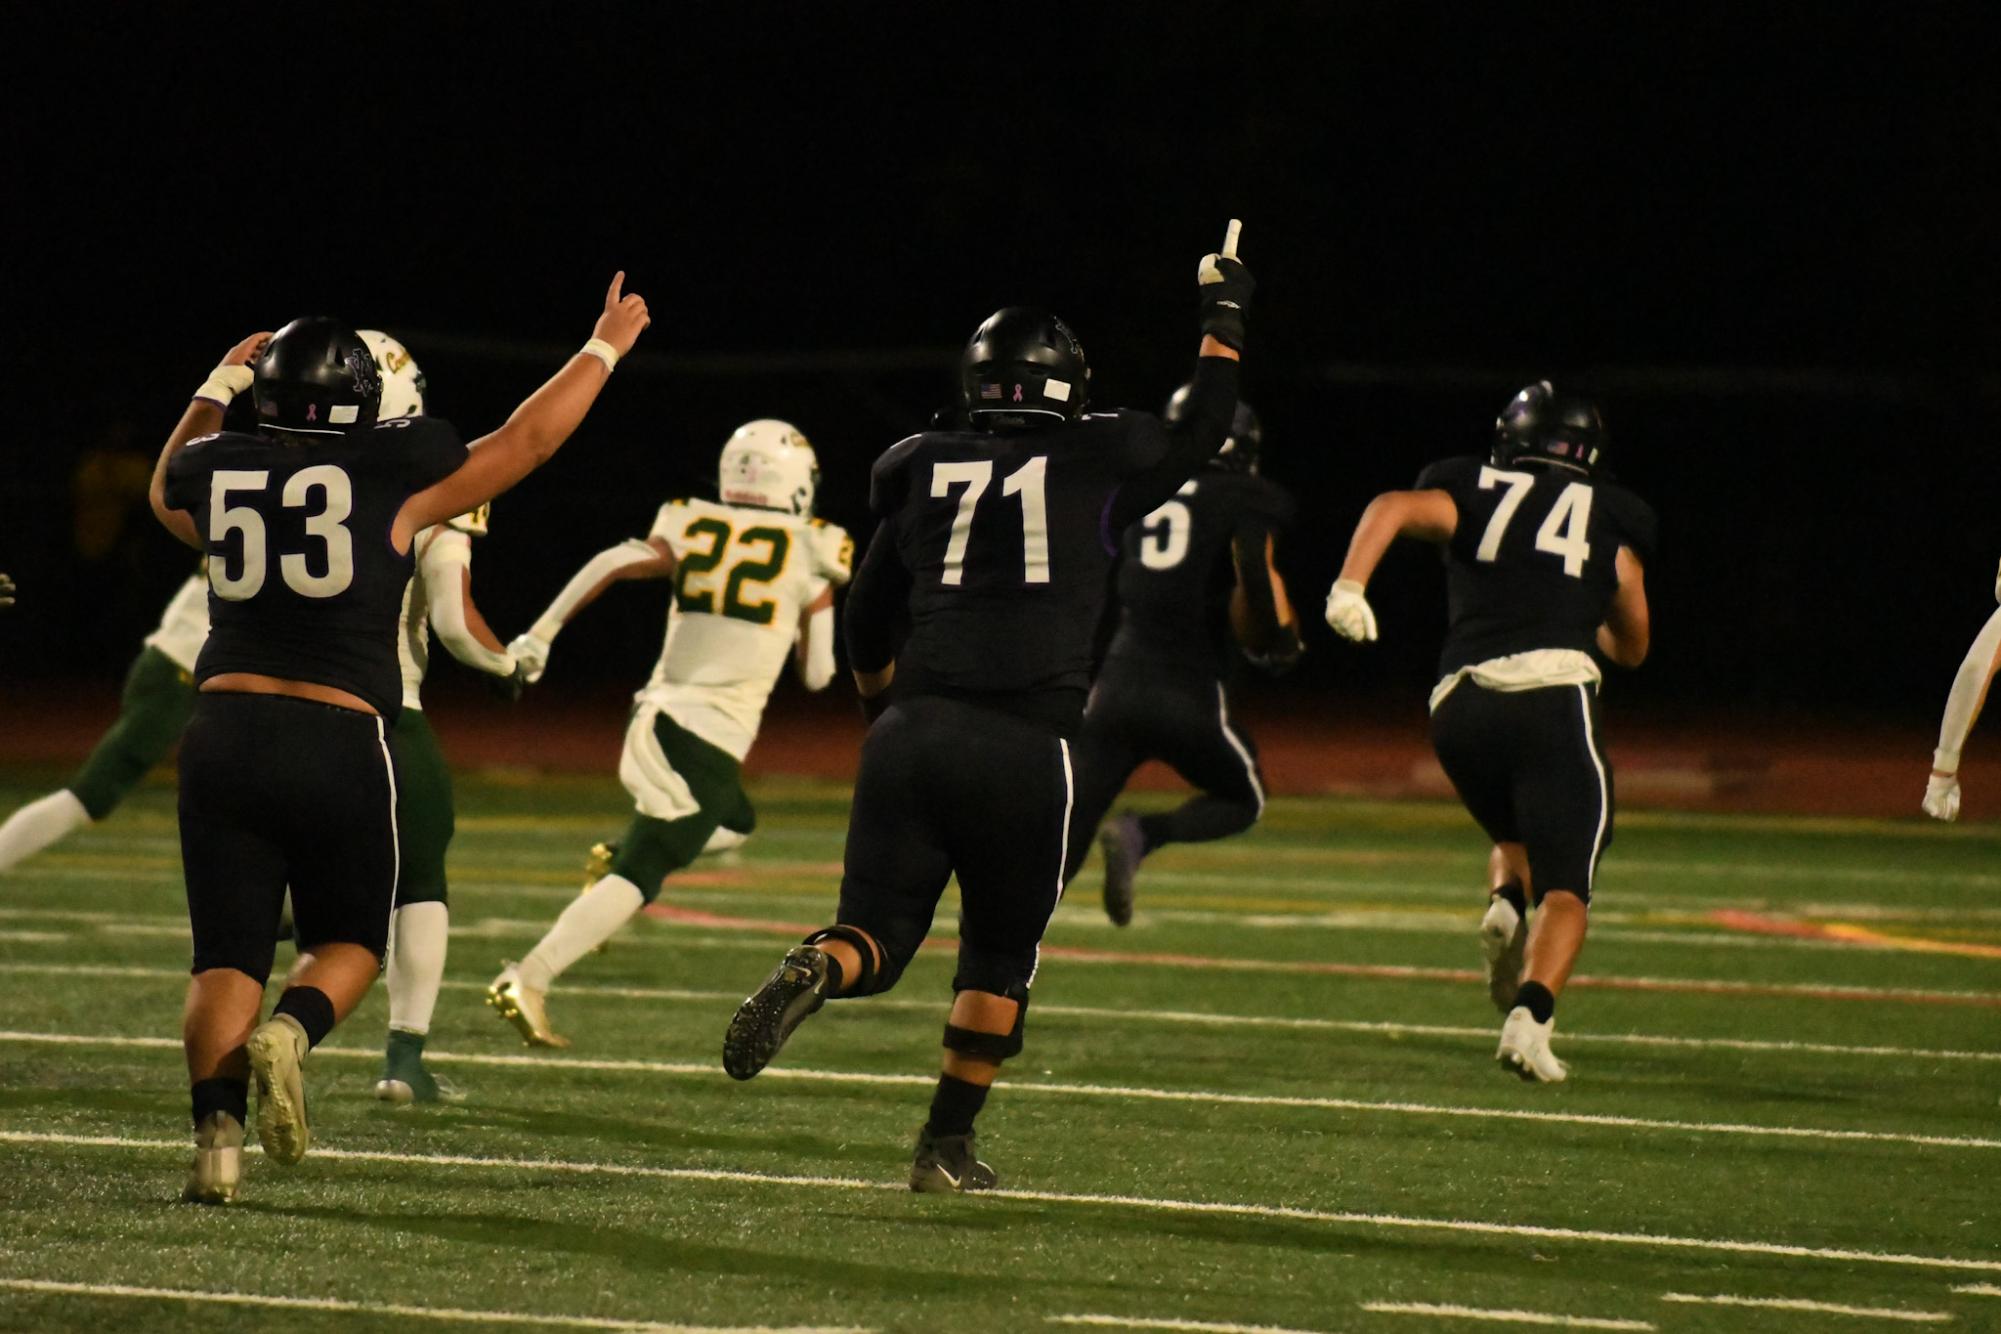 Amador+Valley+Football+defeats+Livermore+High+42-7+to+continue+winning+streak